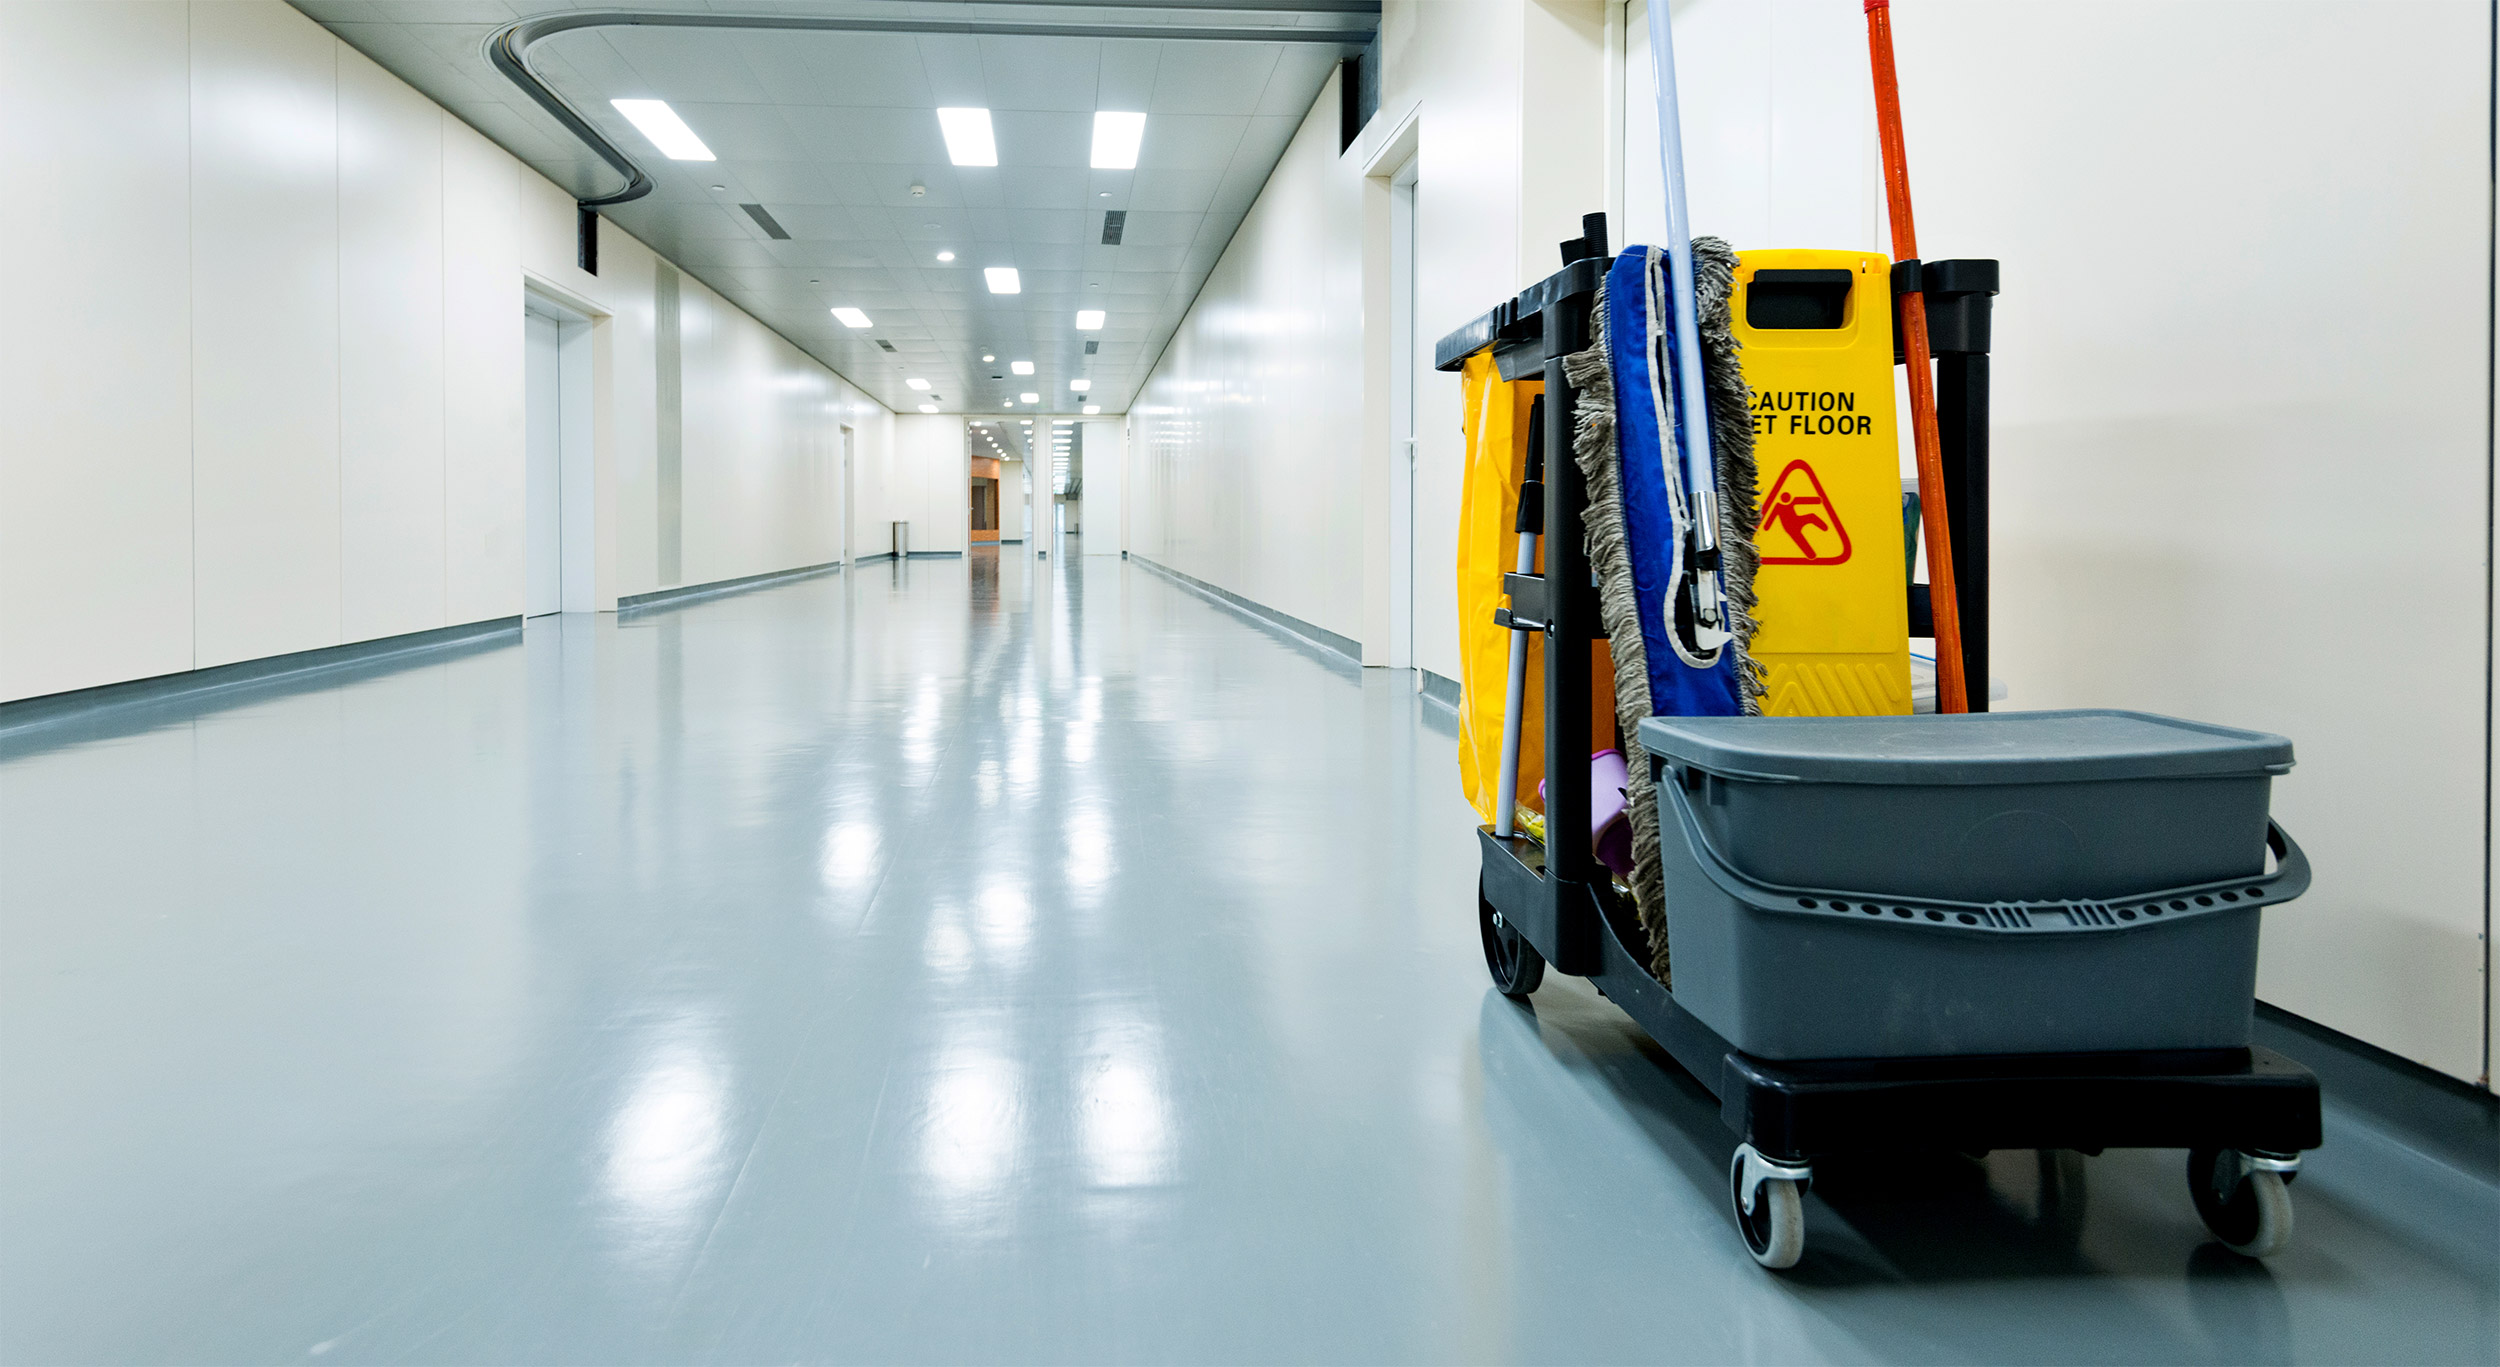 What Role Do Healthcare Floors Play in Controlling Infection?